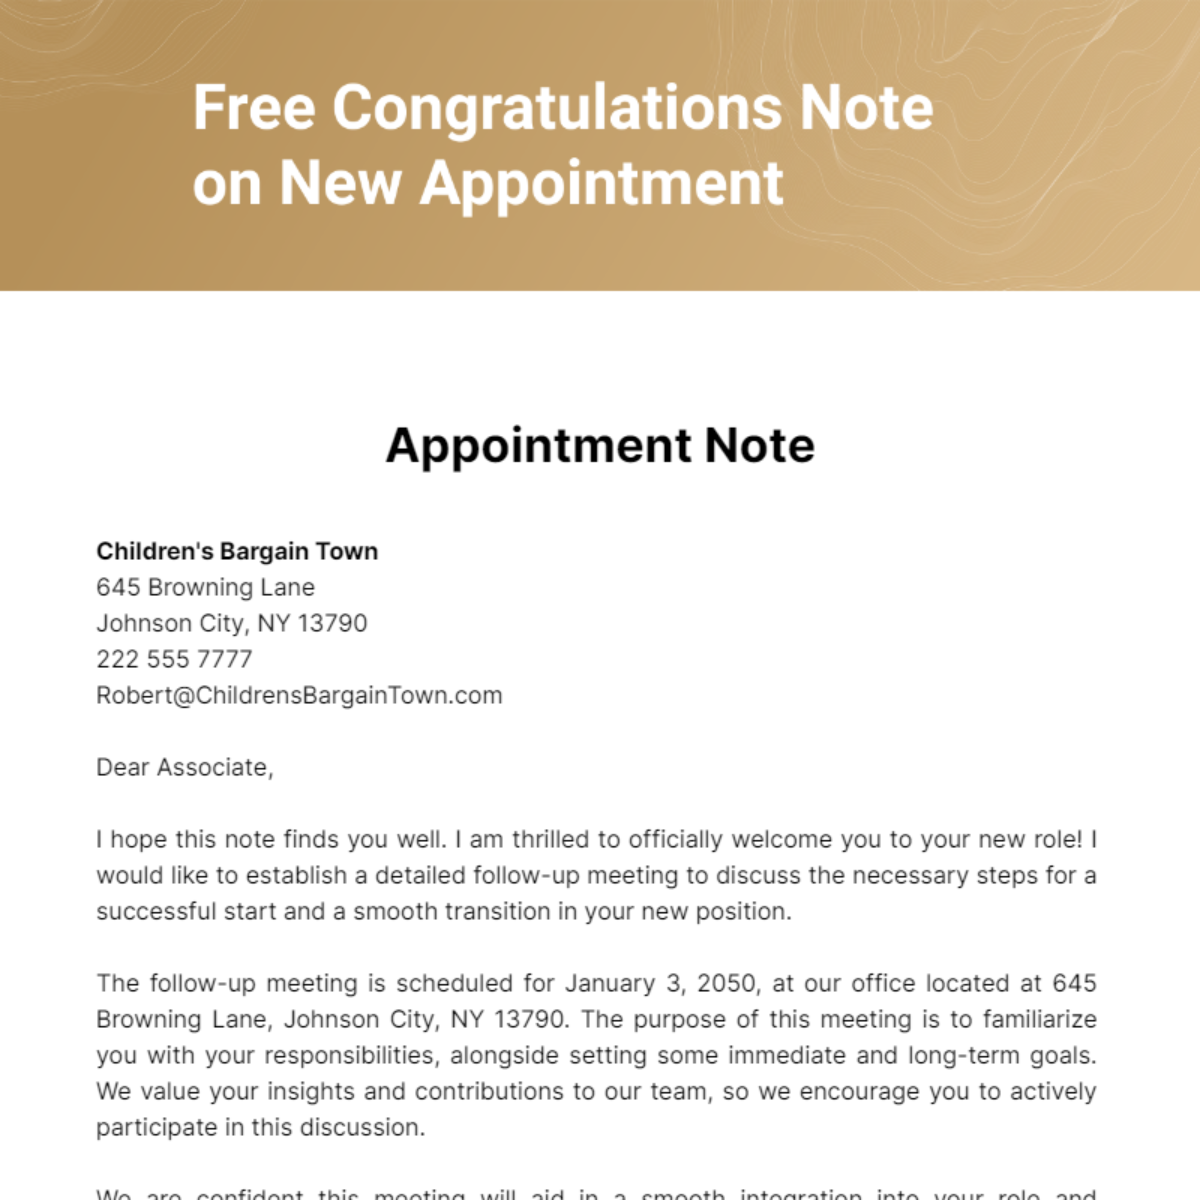 Free Congratulations Note on New Appointment Template